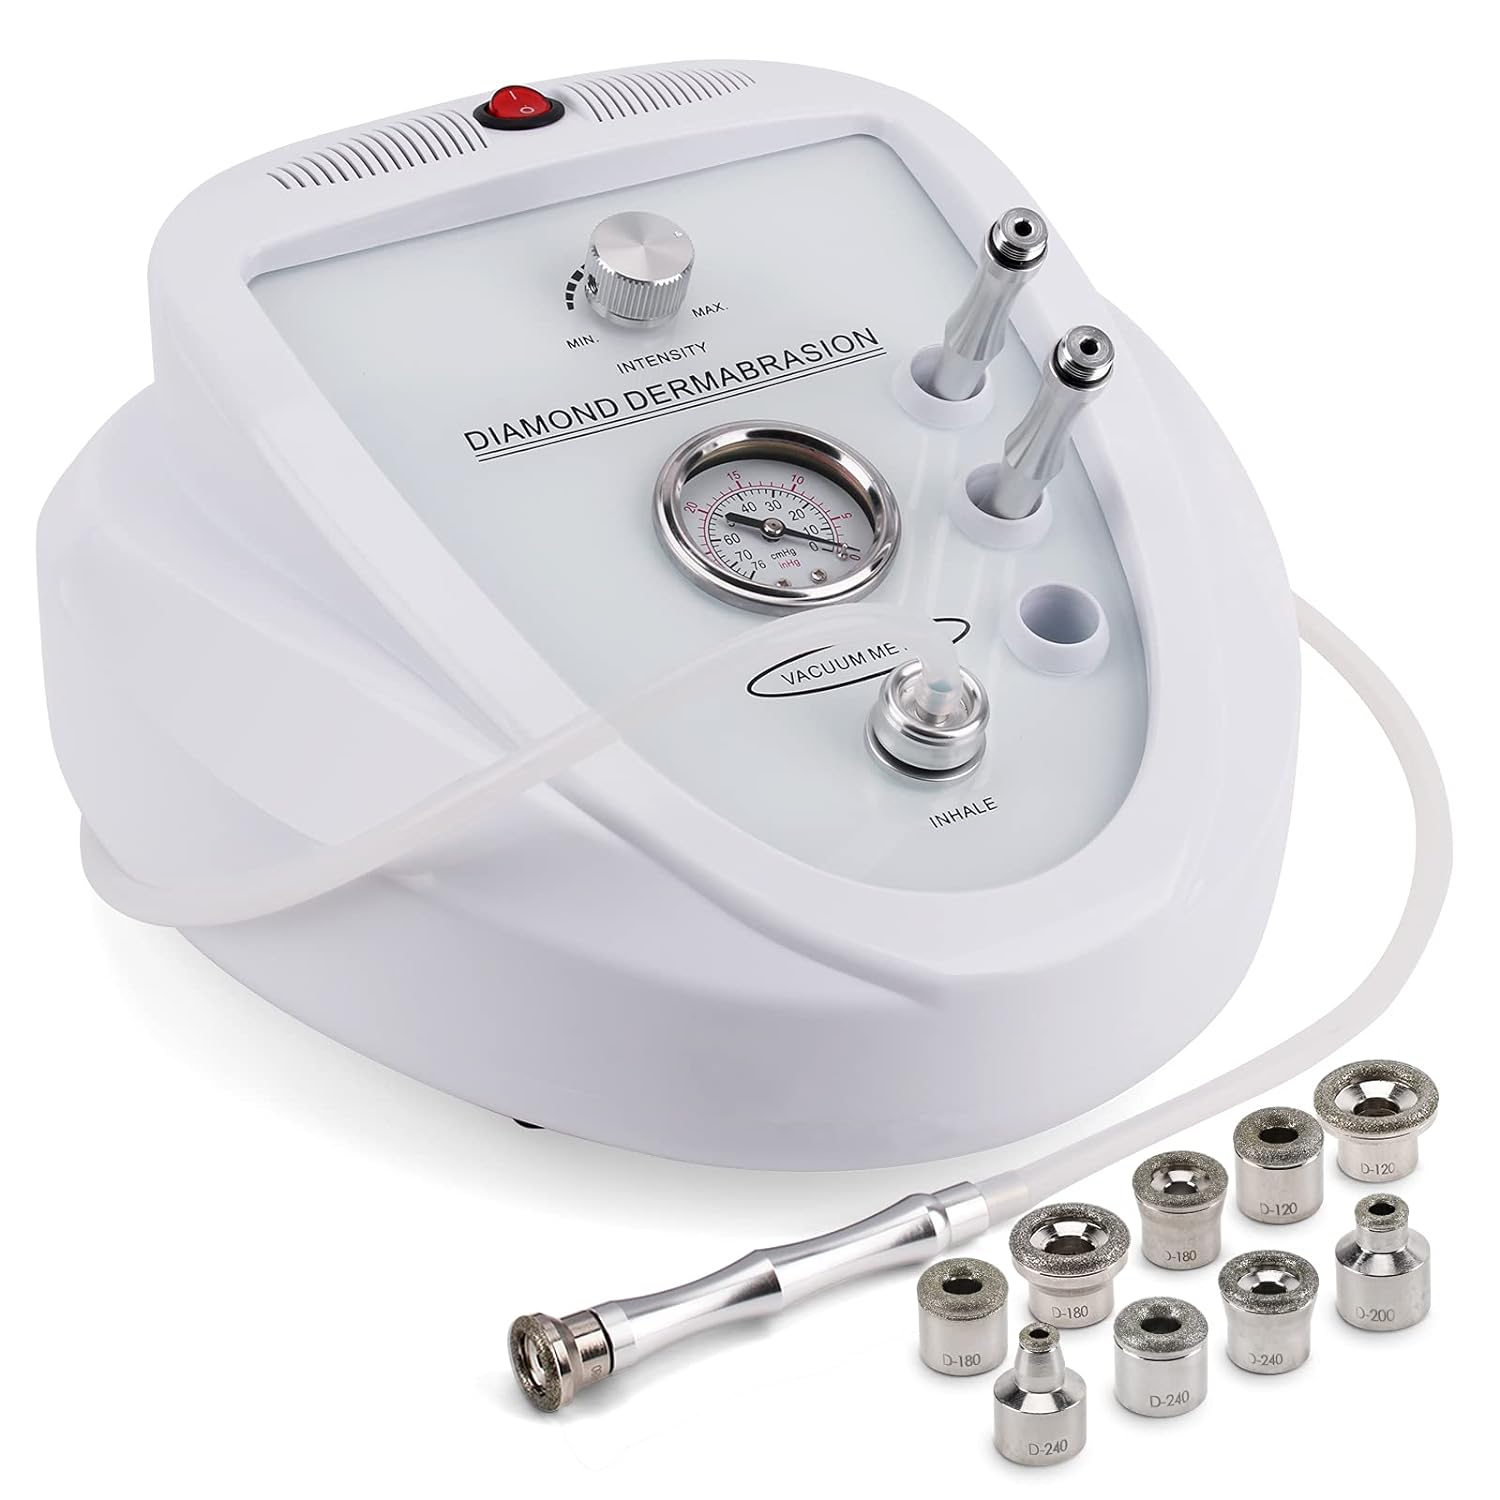 Best microdermabrasion machine with power suction